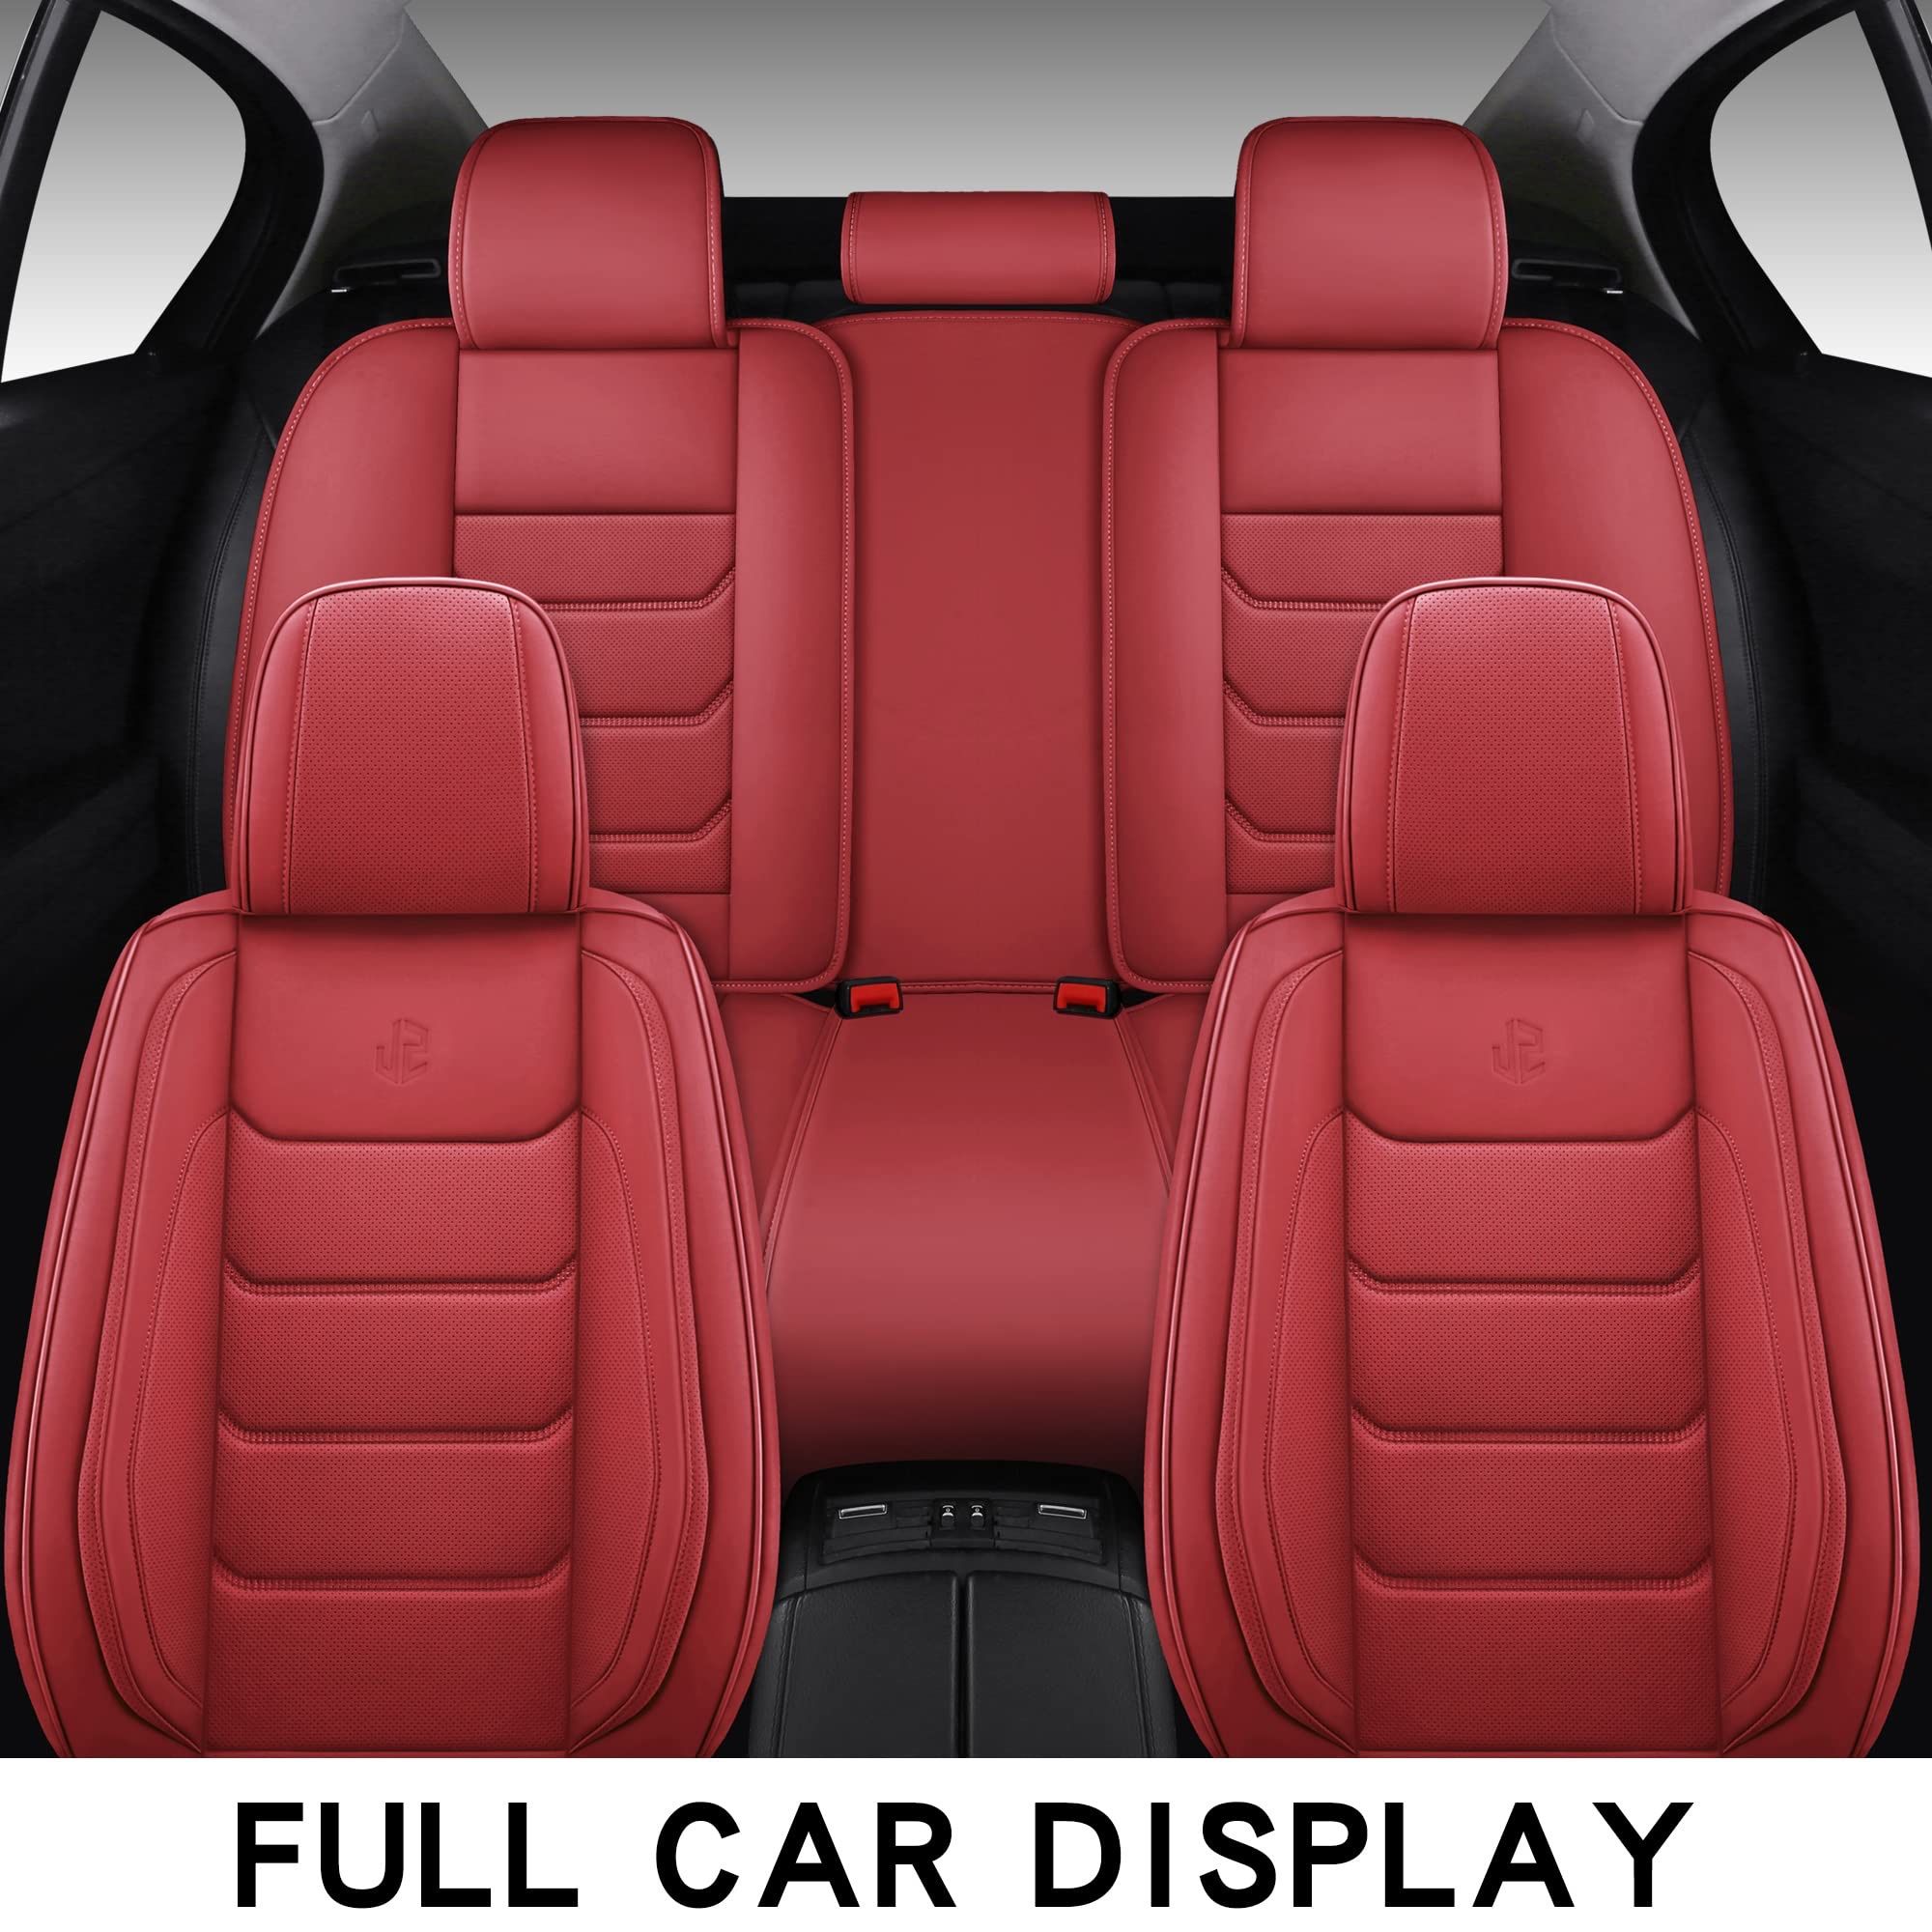 Full Coverage Faux Leather Car Seat Covers Universal Fit for Most Cars,Trucks,Sedans and SUVs with Waterproof Leatherette in Automotive Seat Cover Acc